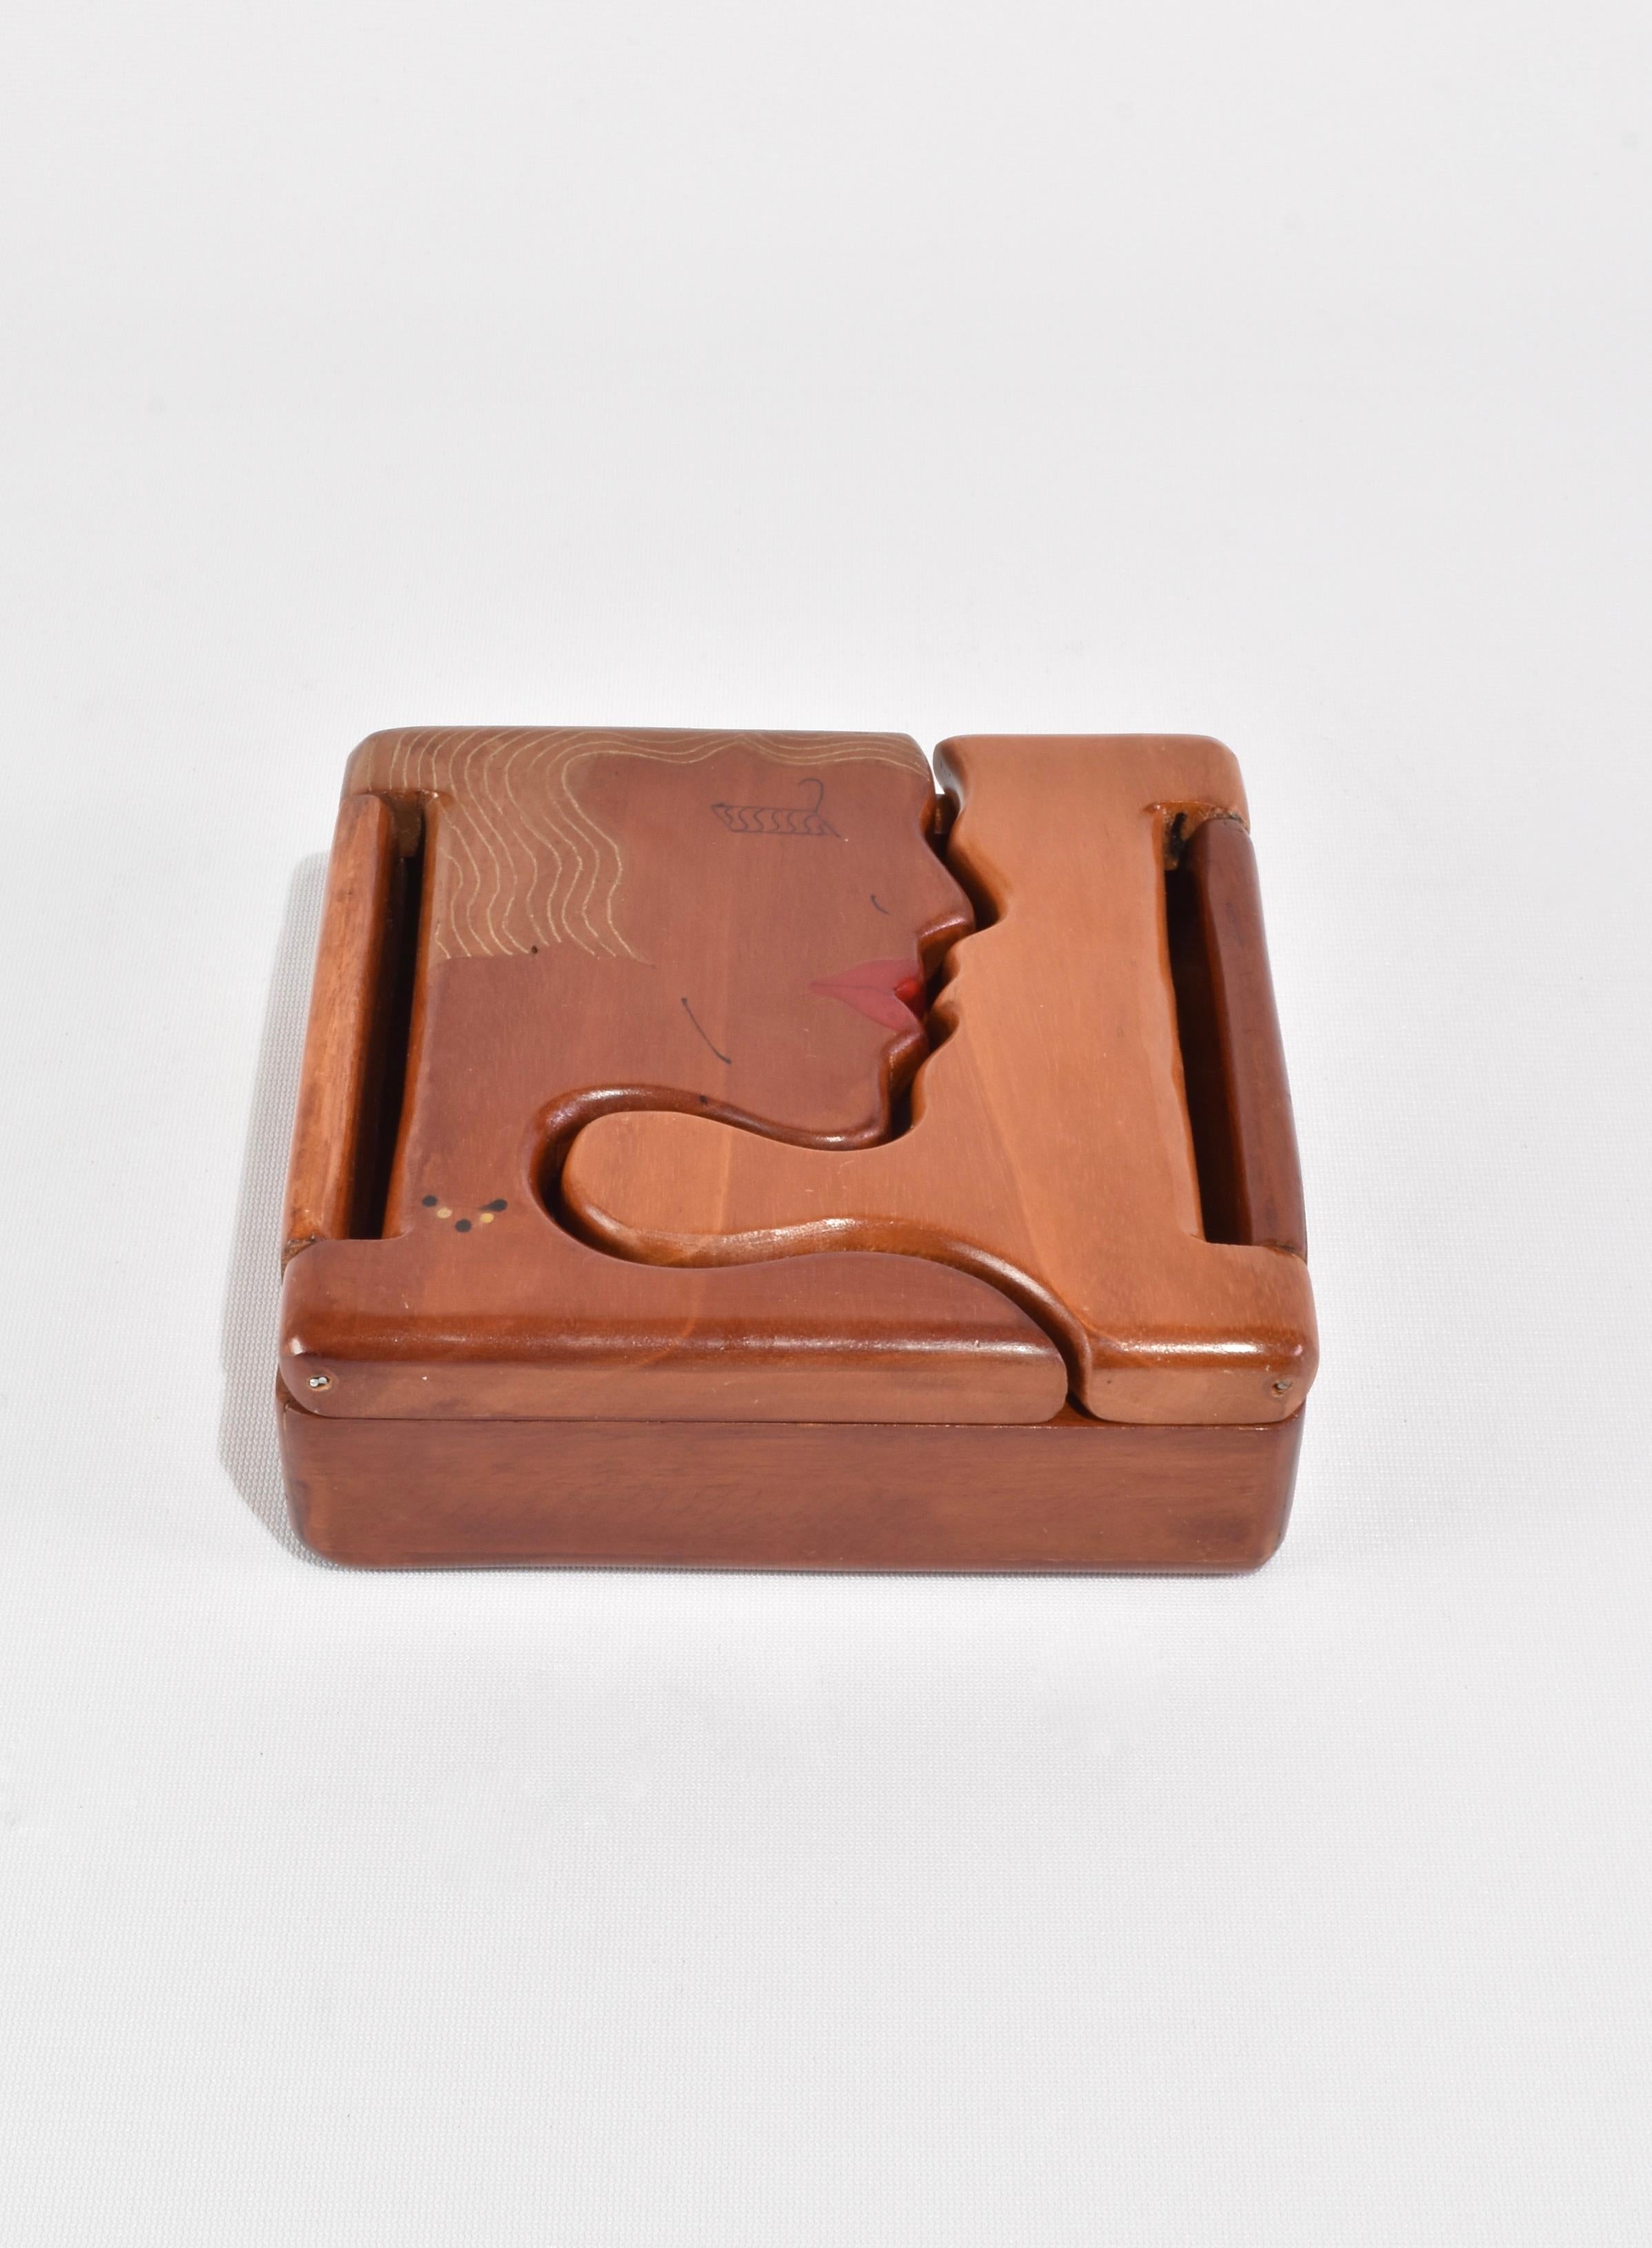 Stunning vintage hand-carved wooden box with a face motif hinged lid.